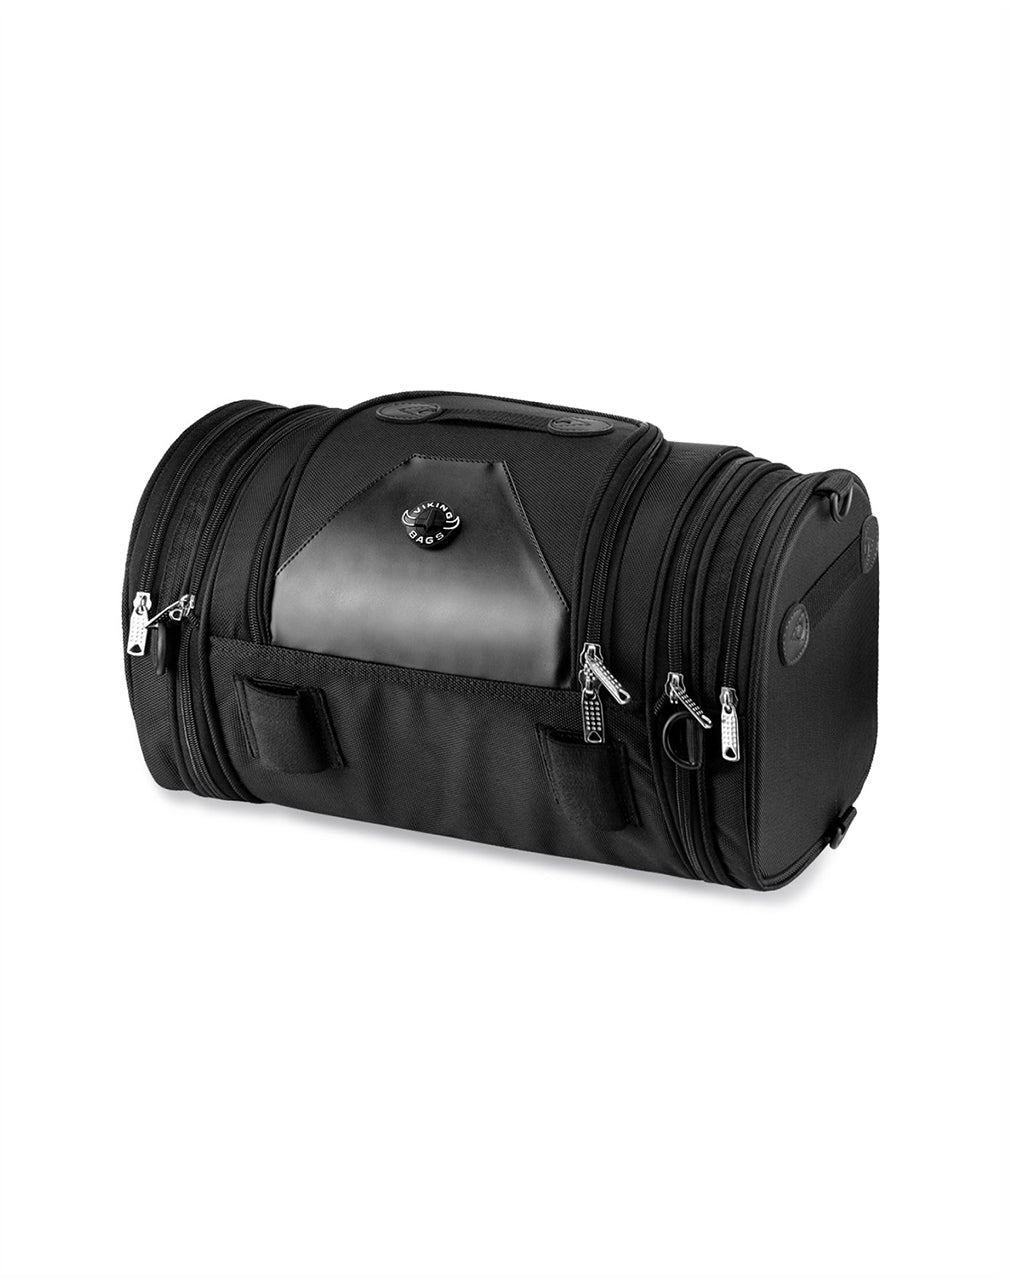 Harley Davidson Roll Bags. Best Motorcycle Roll Bags for Harley